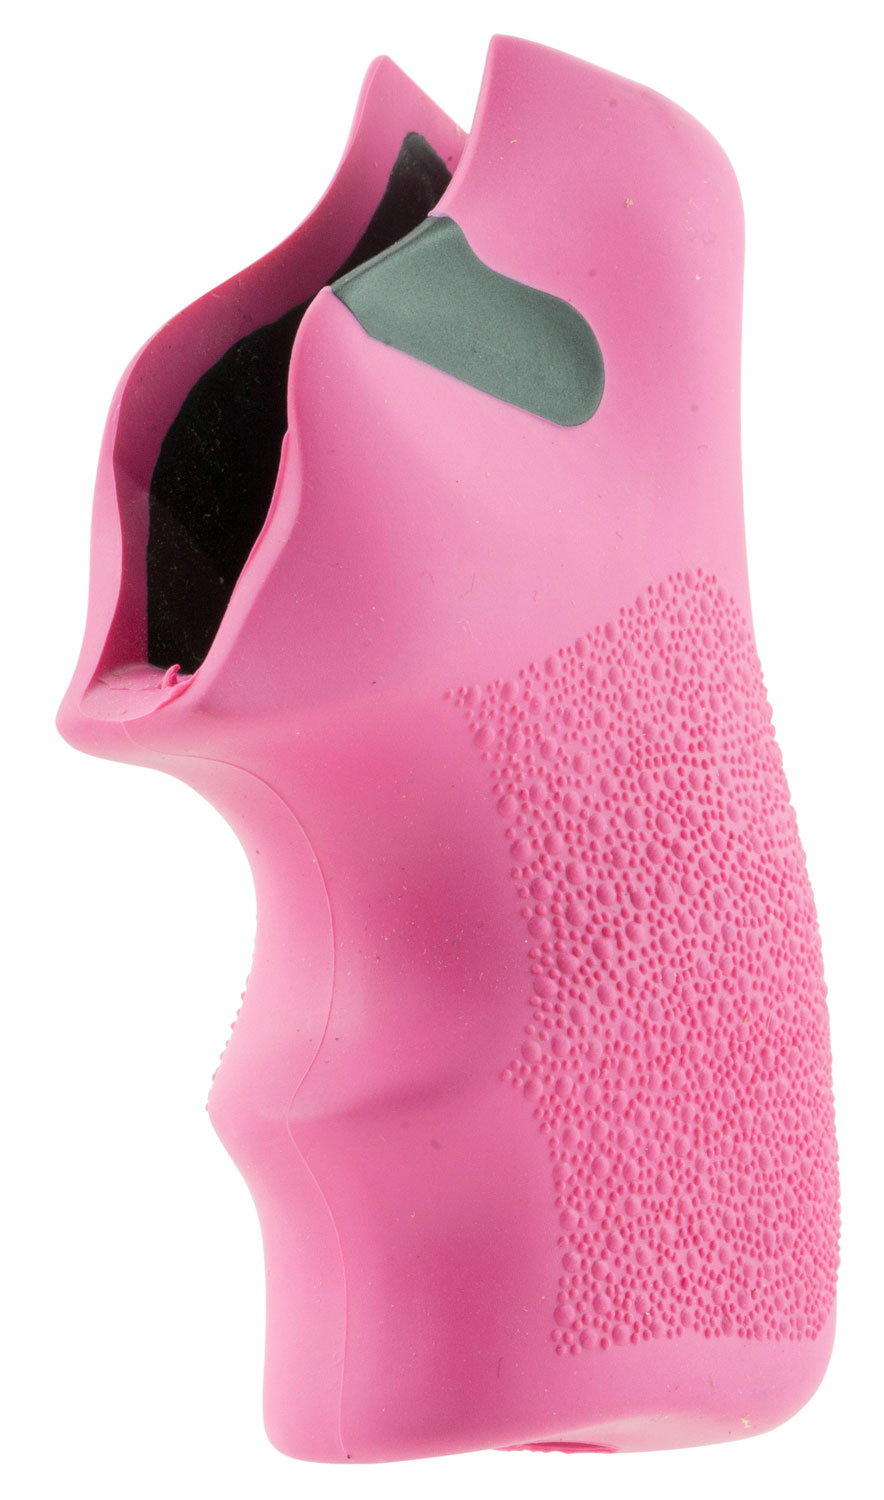 Hogue 78027 Tamer  Cushion Pink Rubber Grip with Finger Grooves for Ruger LCR, LCRx